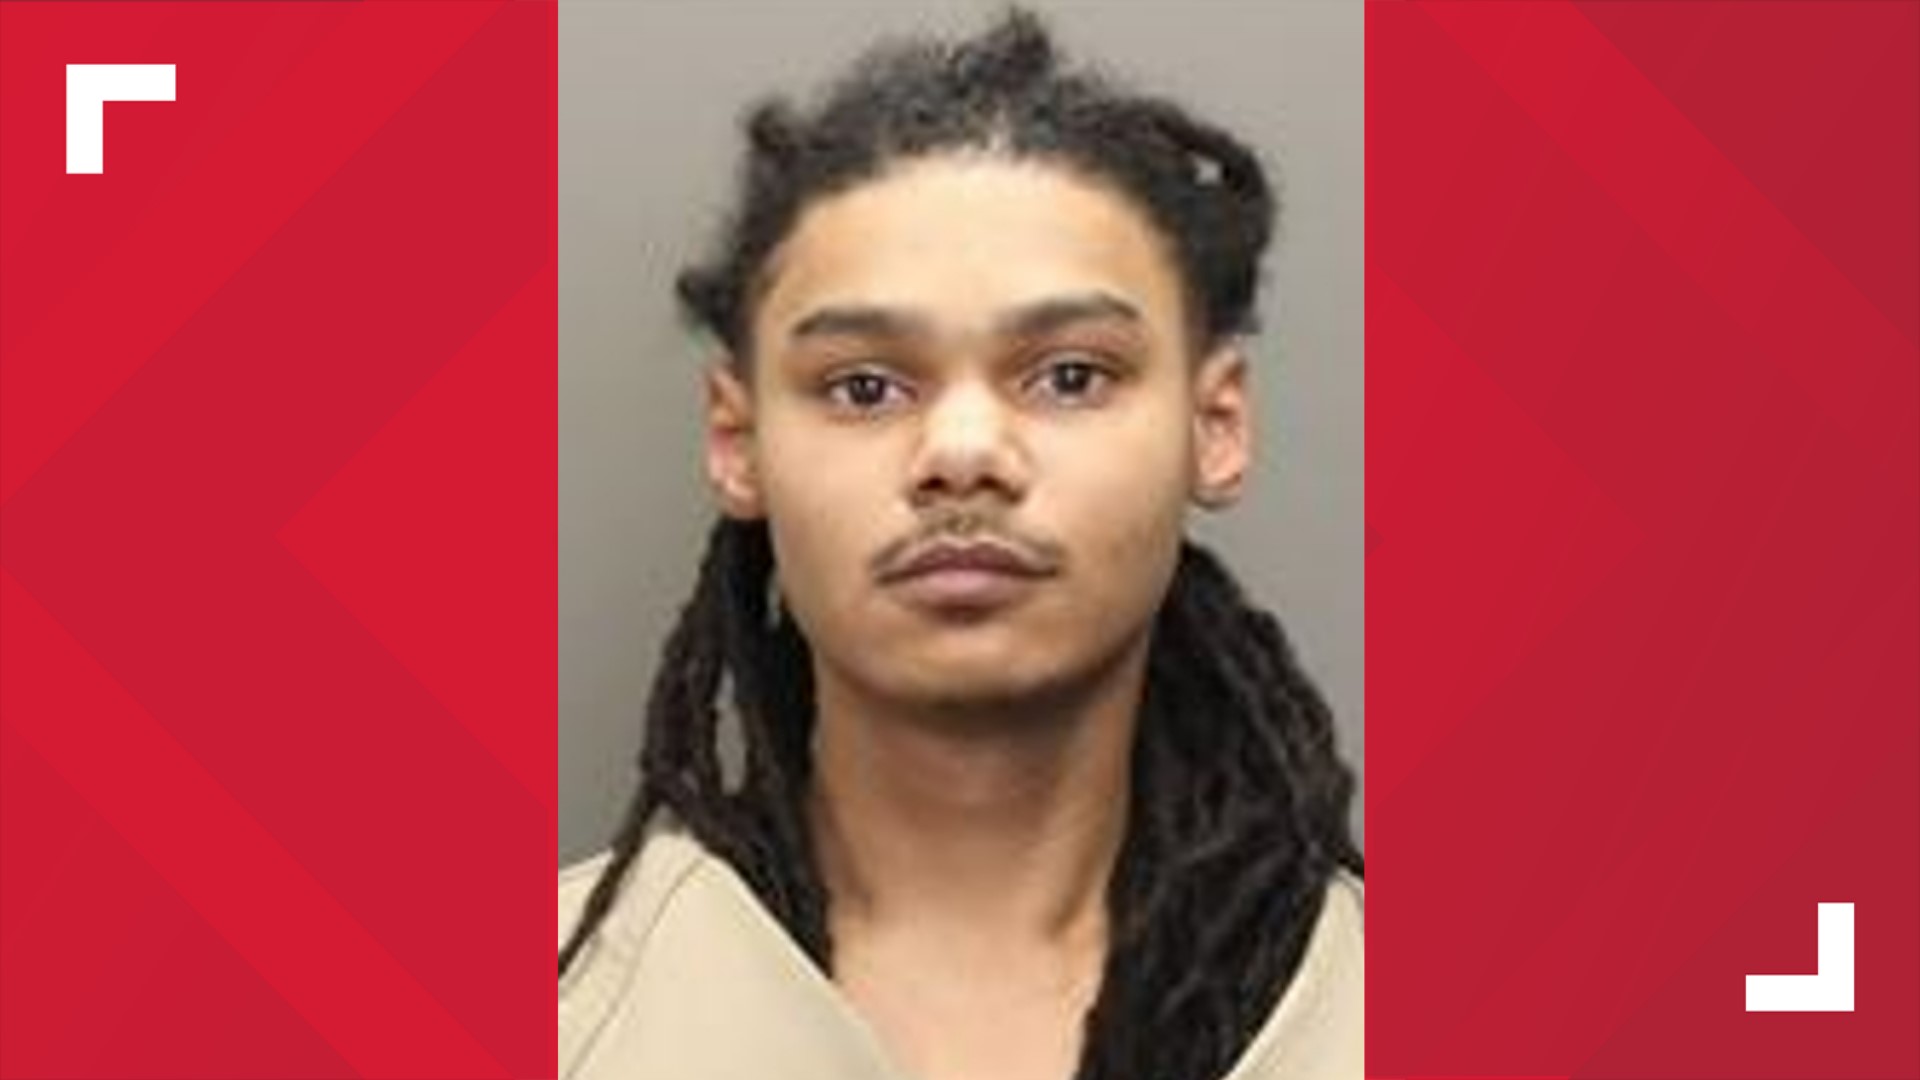 Officers arrested 22-year-old Jealon Brown in connection to the shooting. He is charged with felonious assault.